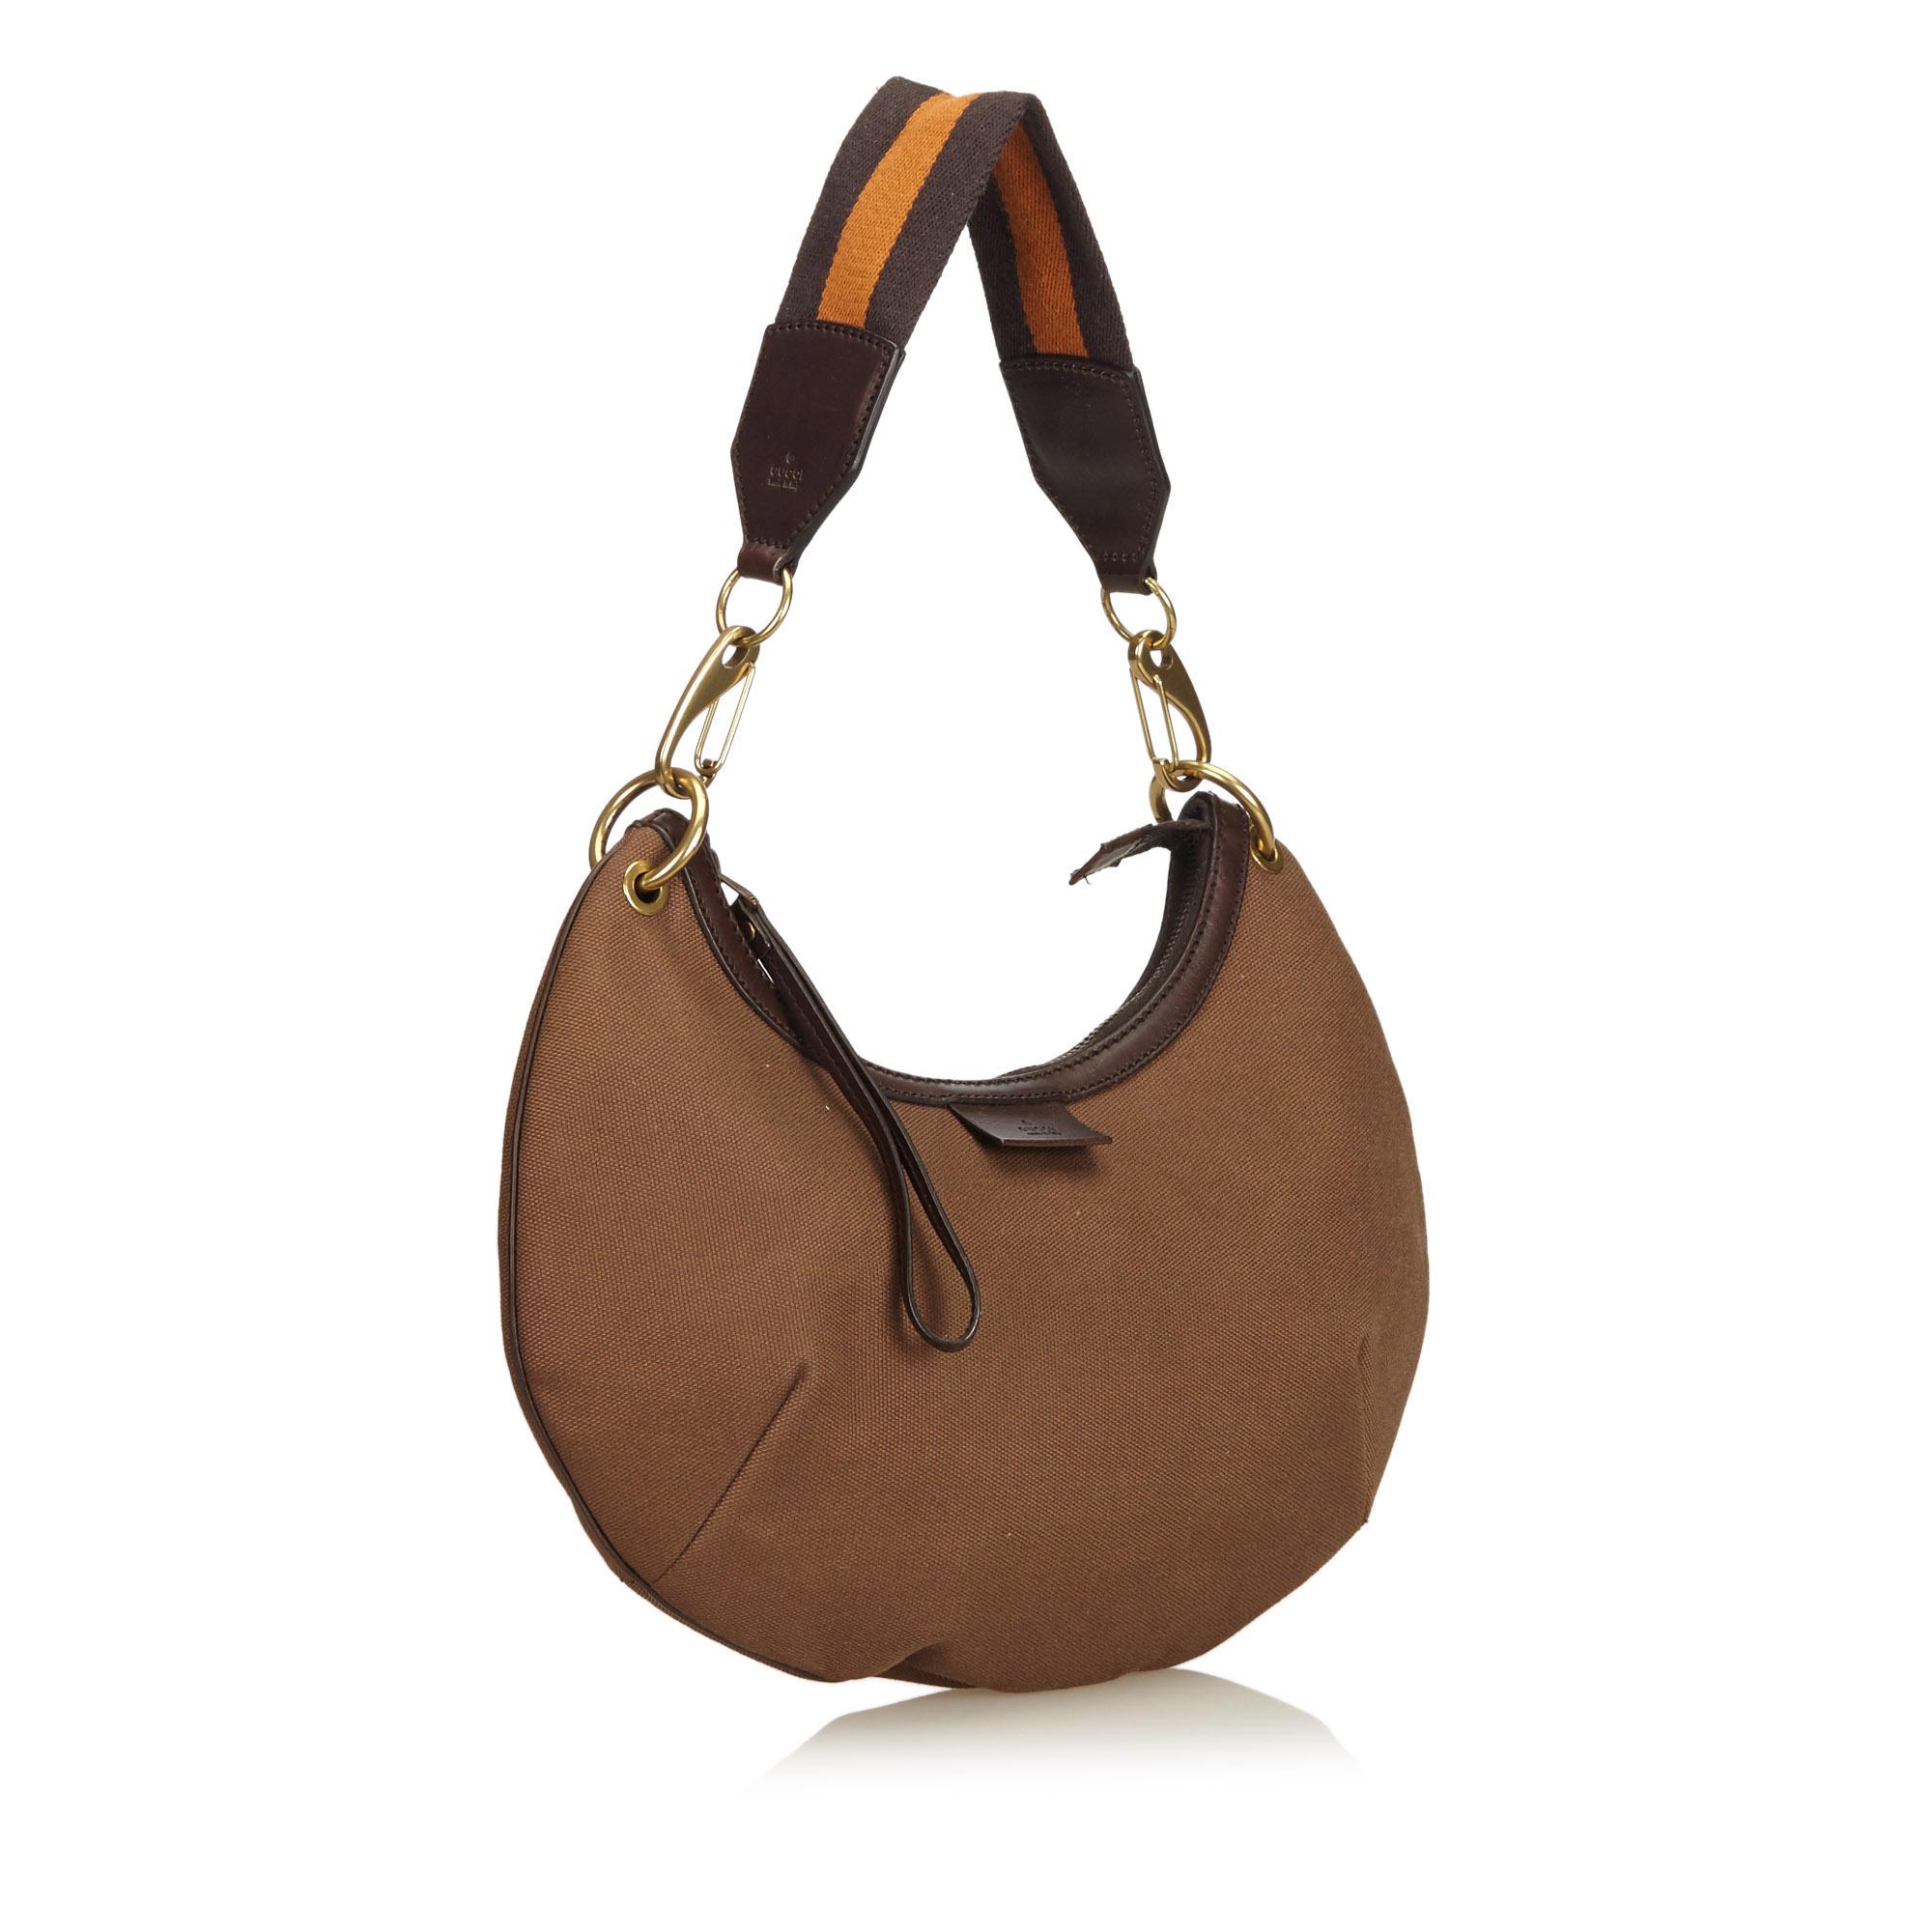 This shoulder bag features a canvas body with leather trim, flat strap, top zip closure and interior zip pocket.

It carries a AB condition rating.

Dimensions: 
Length 21.00 cm
Width 33.00 cm
Depth 2.00 cm
Shoulder Drop 25.00 cm

Inclusions: Dust